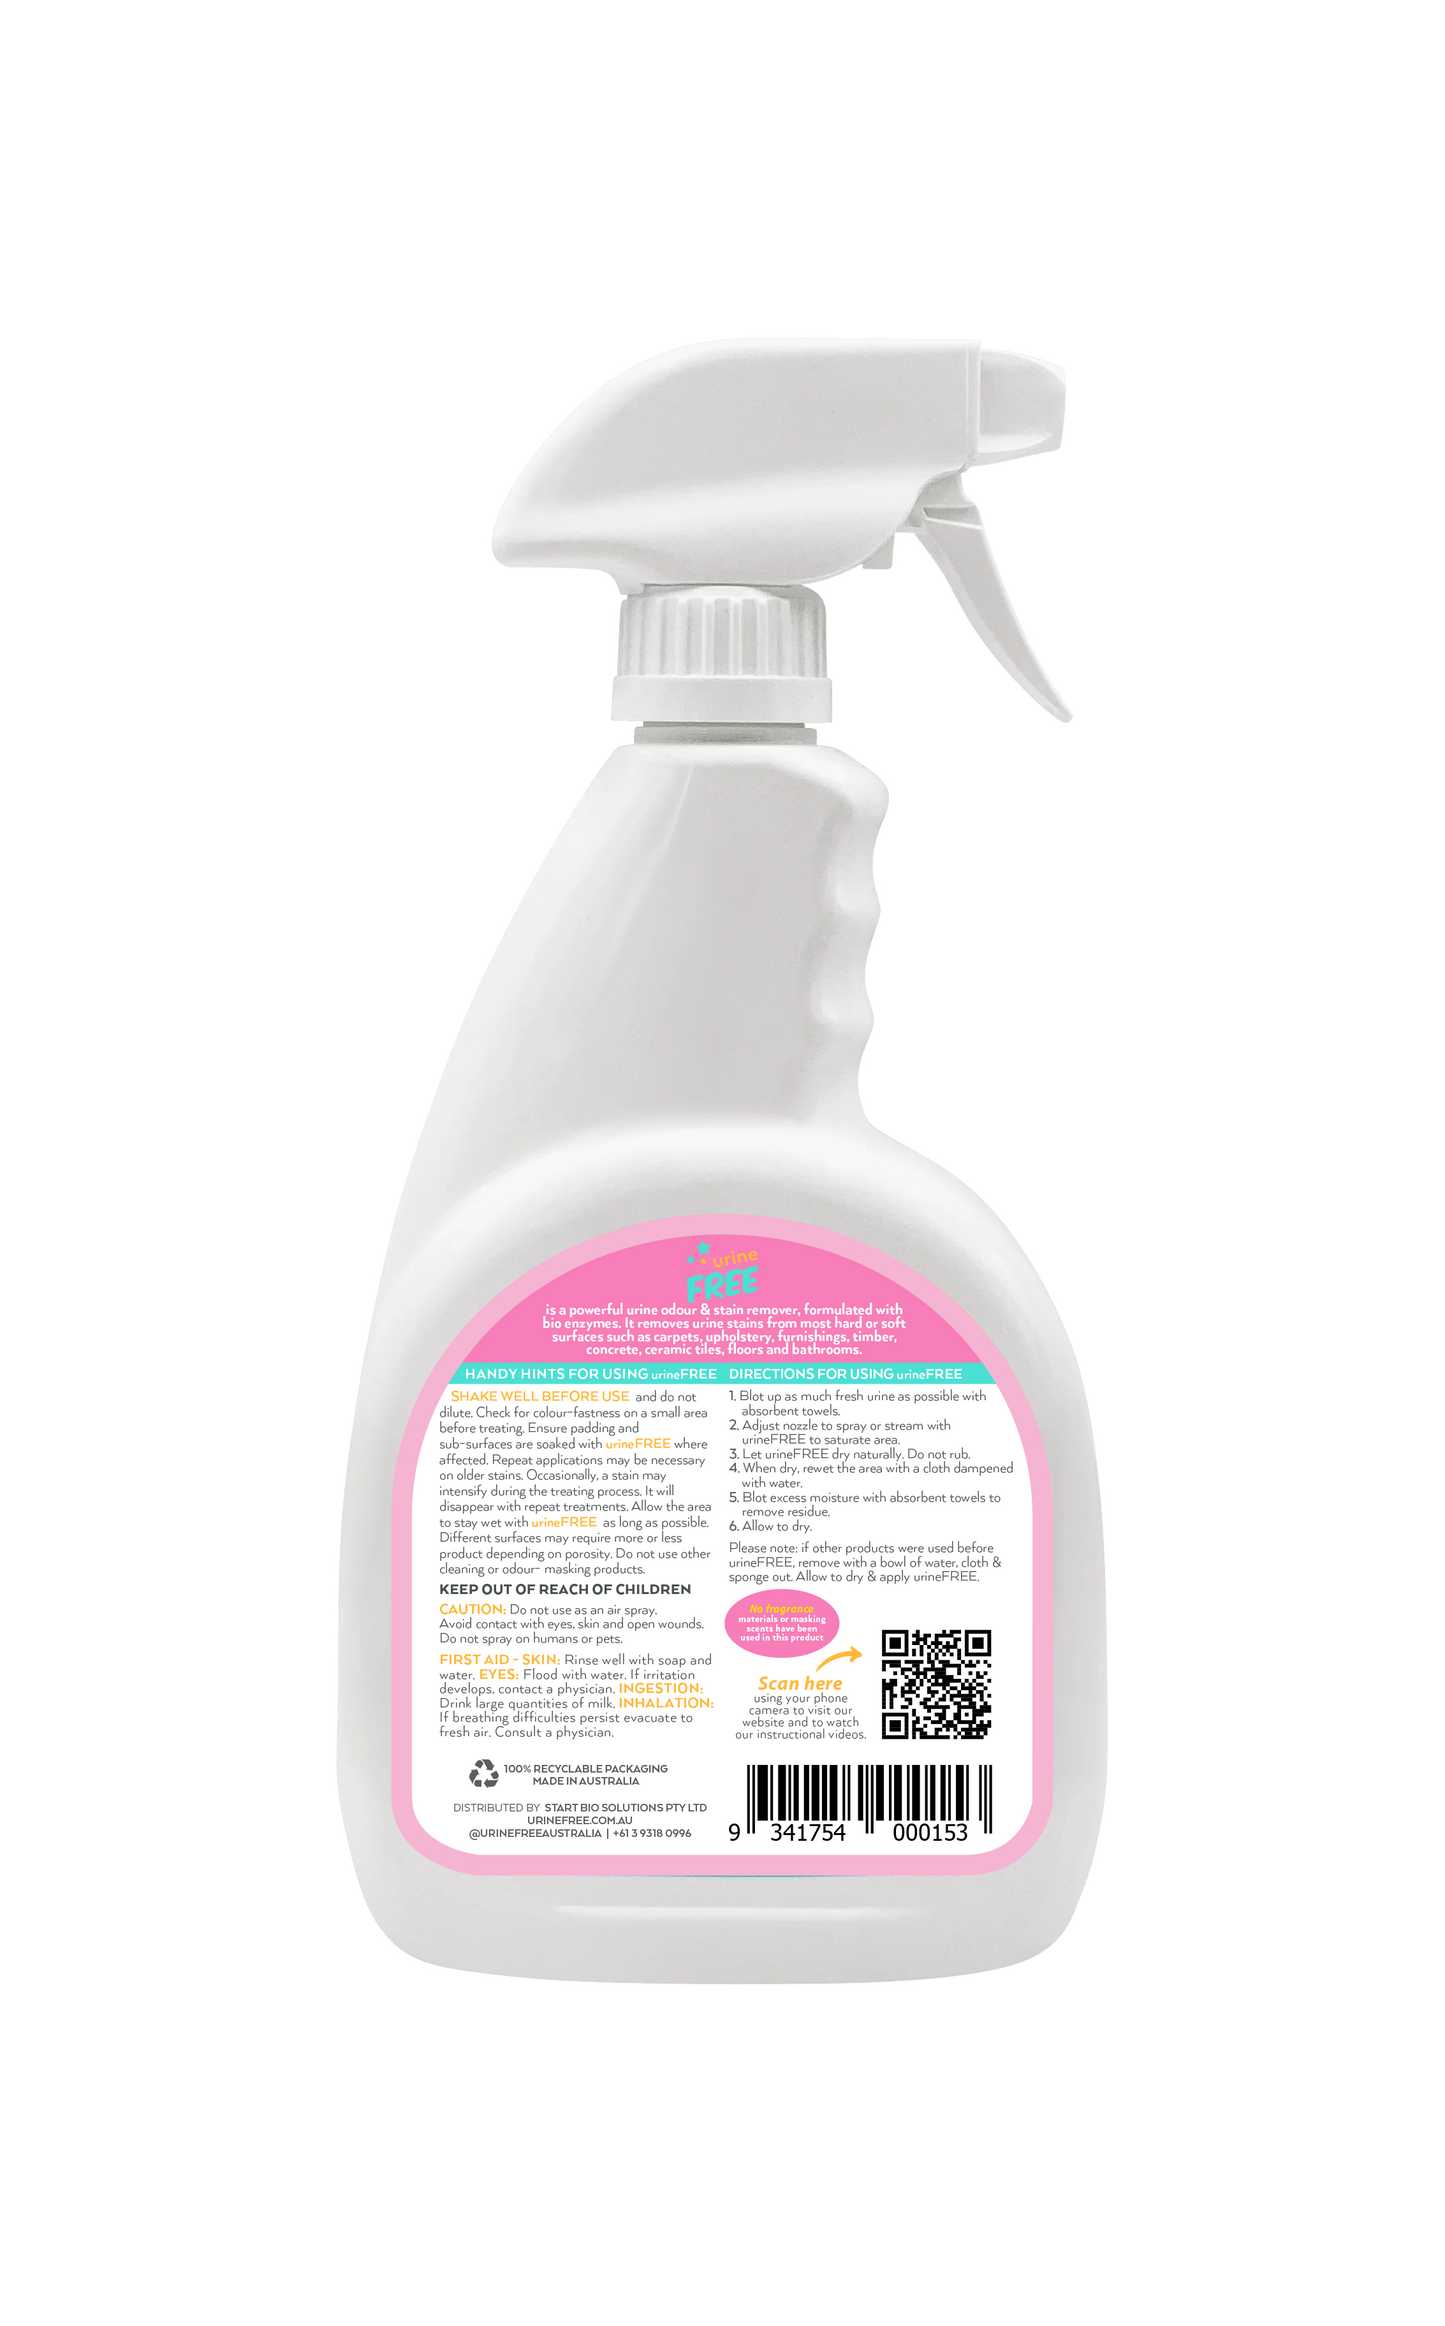 Fragrance Free Urine Stain & Odour Remover